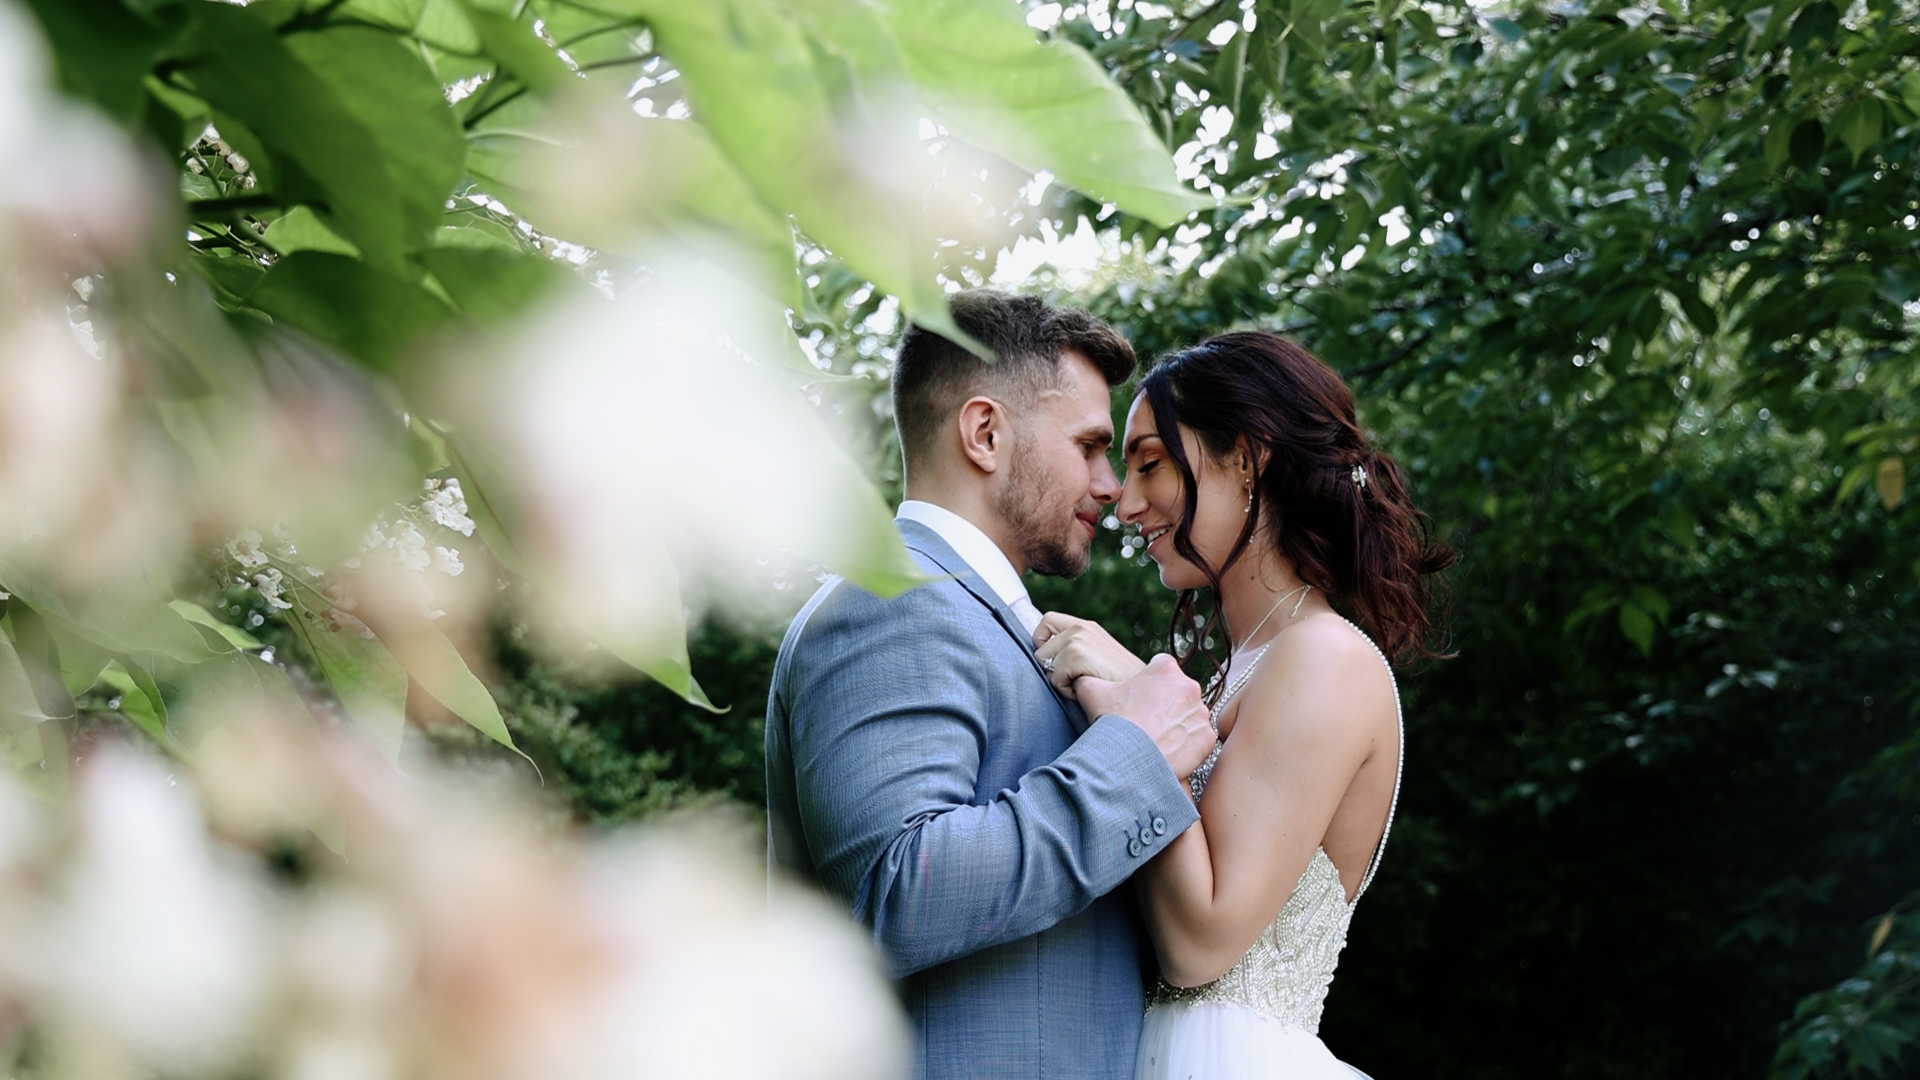 Somerset Wedding Videographer | For Wild-Hearted Humans Wild Heart Films Wedding Videography